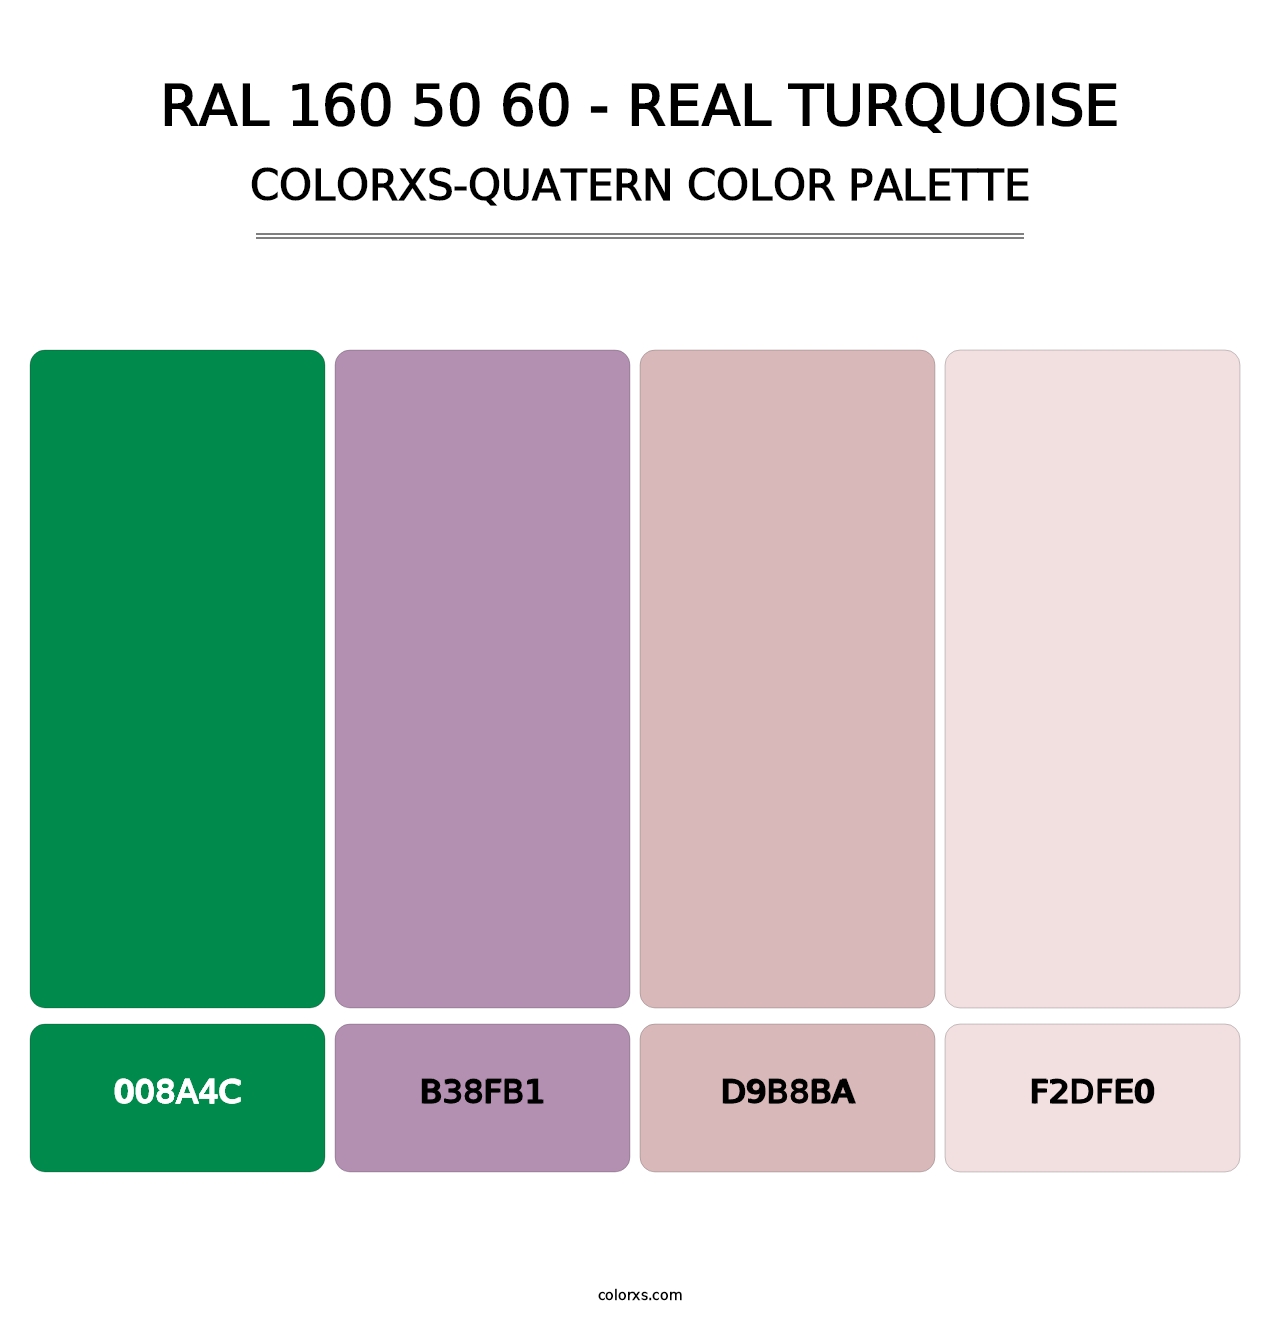 RAL 160 50 60 - Real Turquoise - Colorxs Quatern Palette